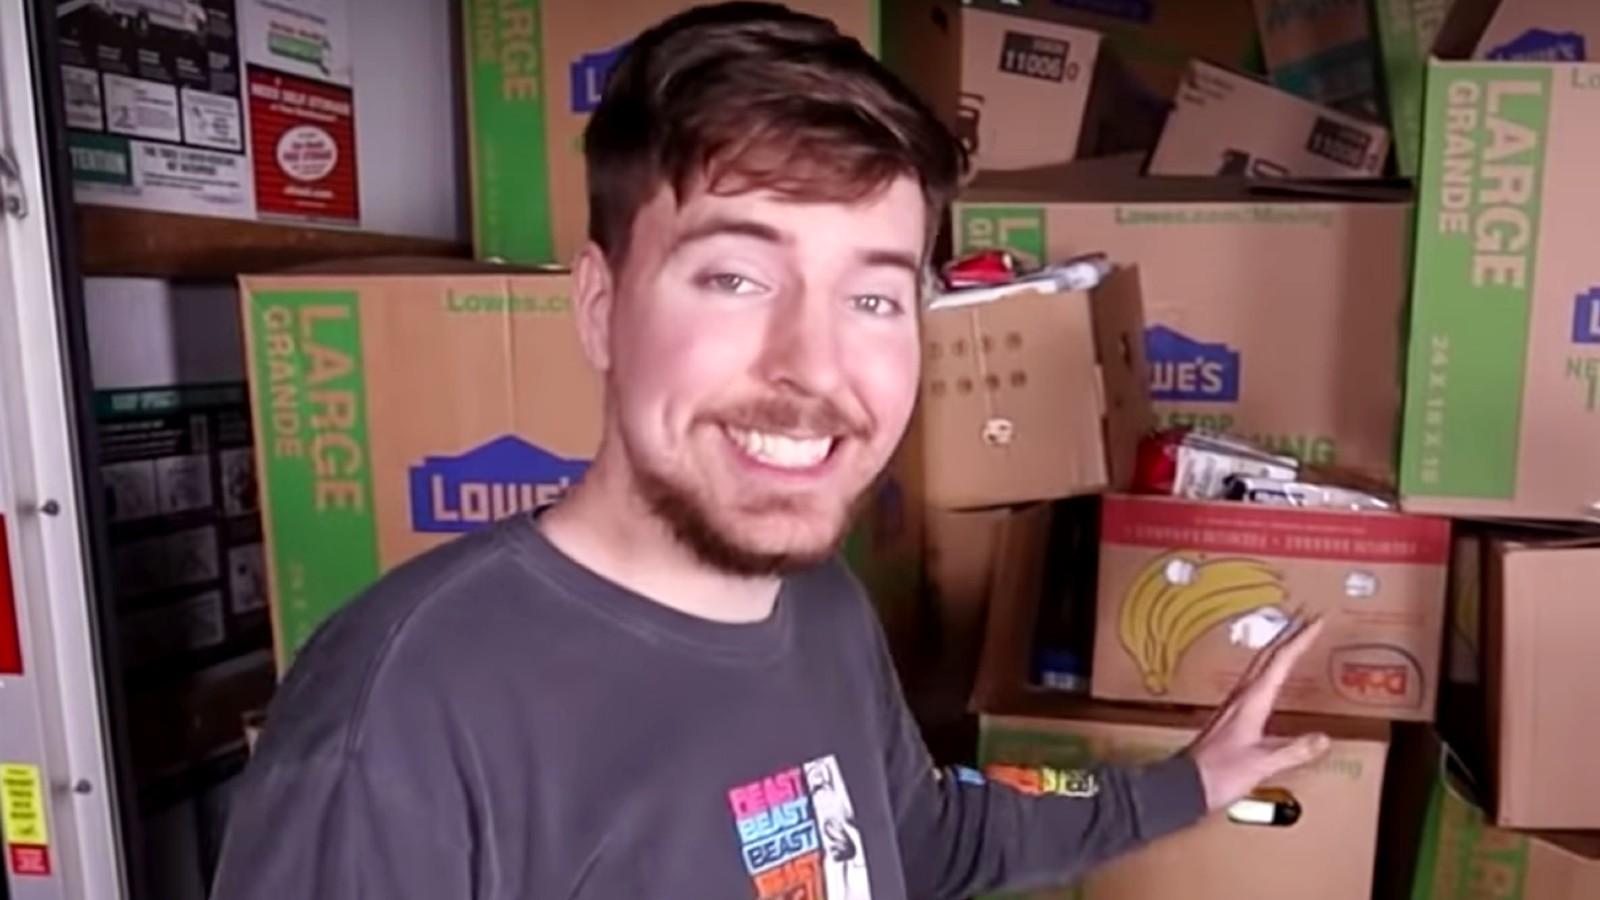 MrBeast stands in front of boxes